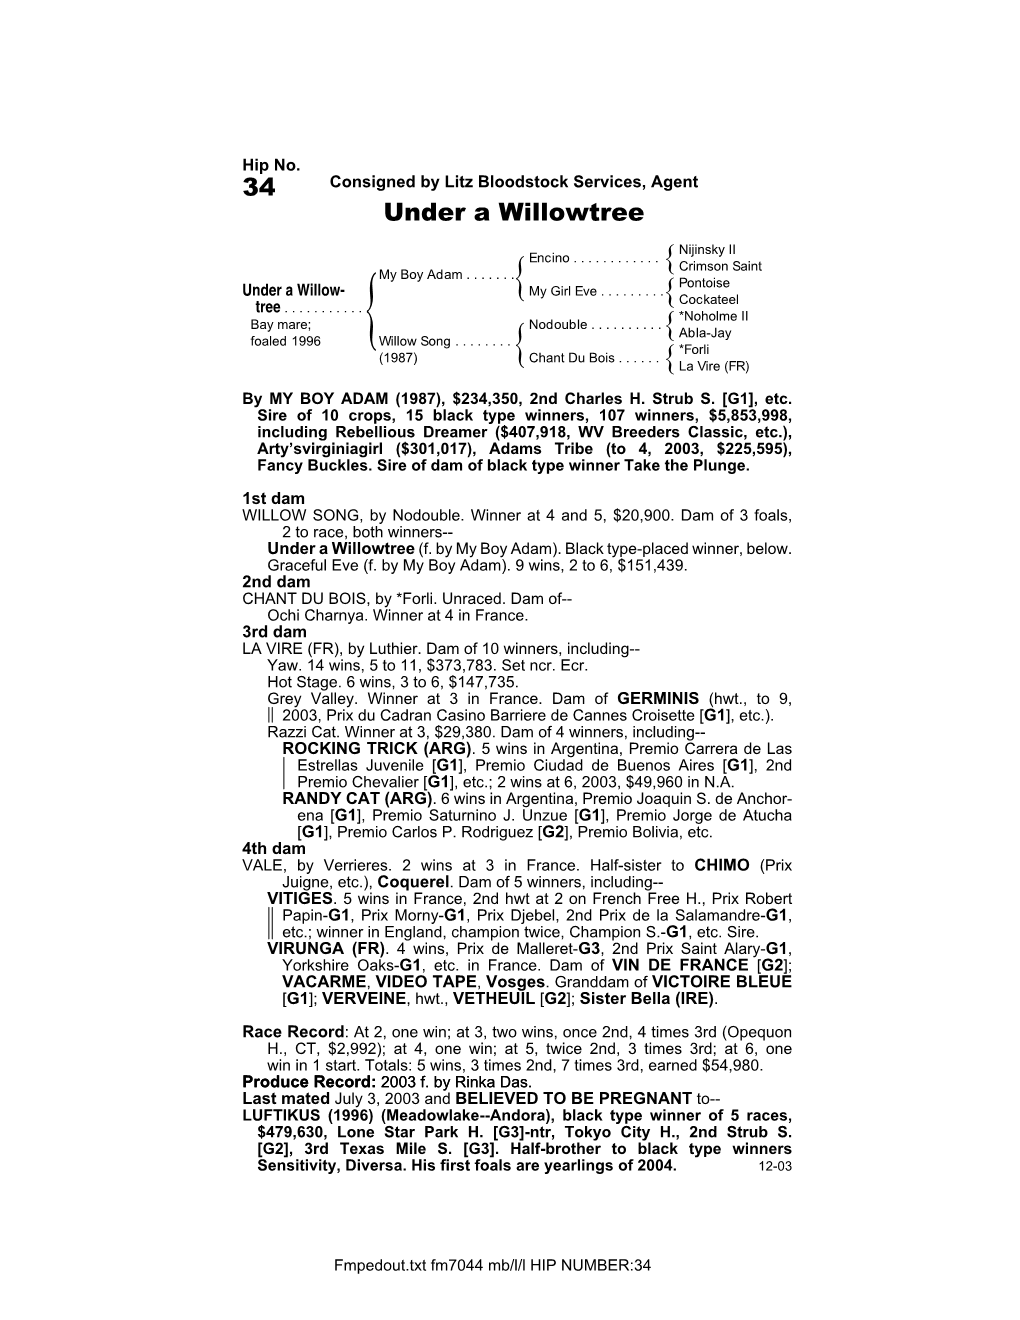 34 Consigned by Litz Bloodstock Services, Agent Under a Willowtree